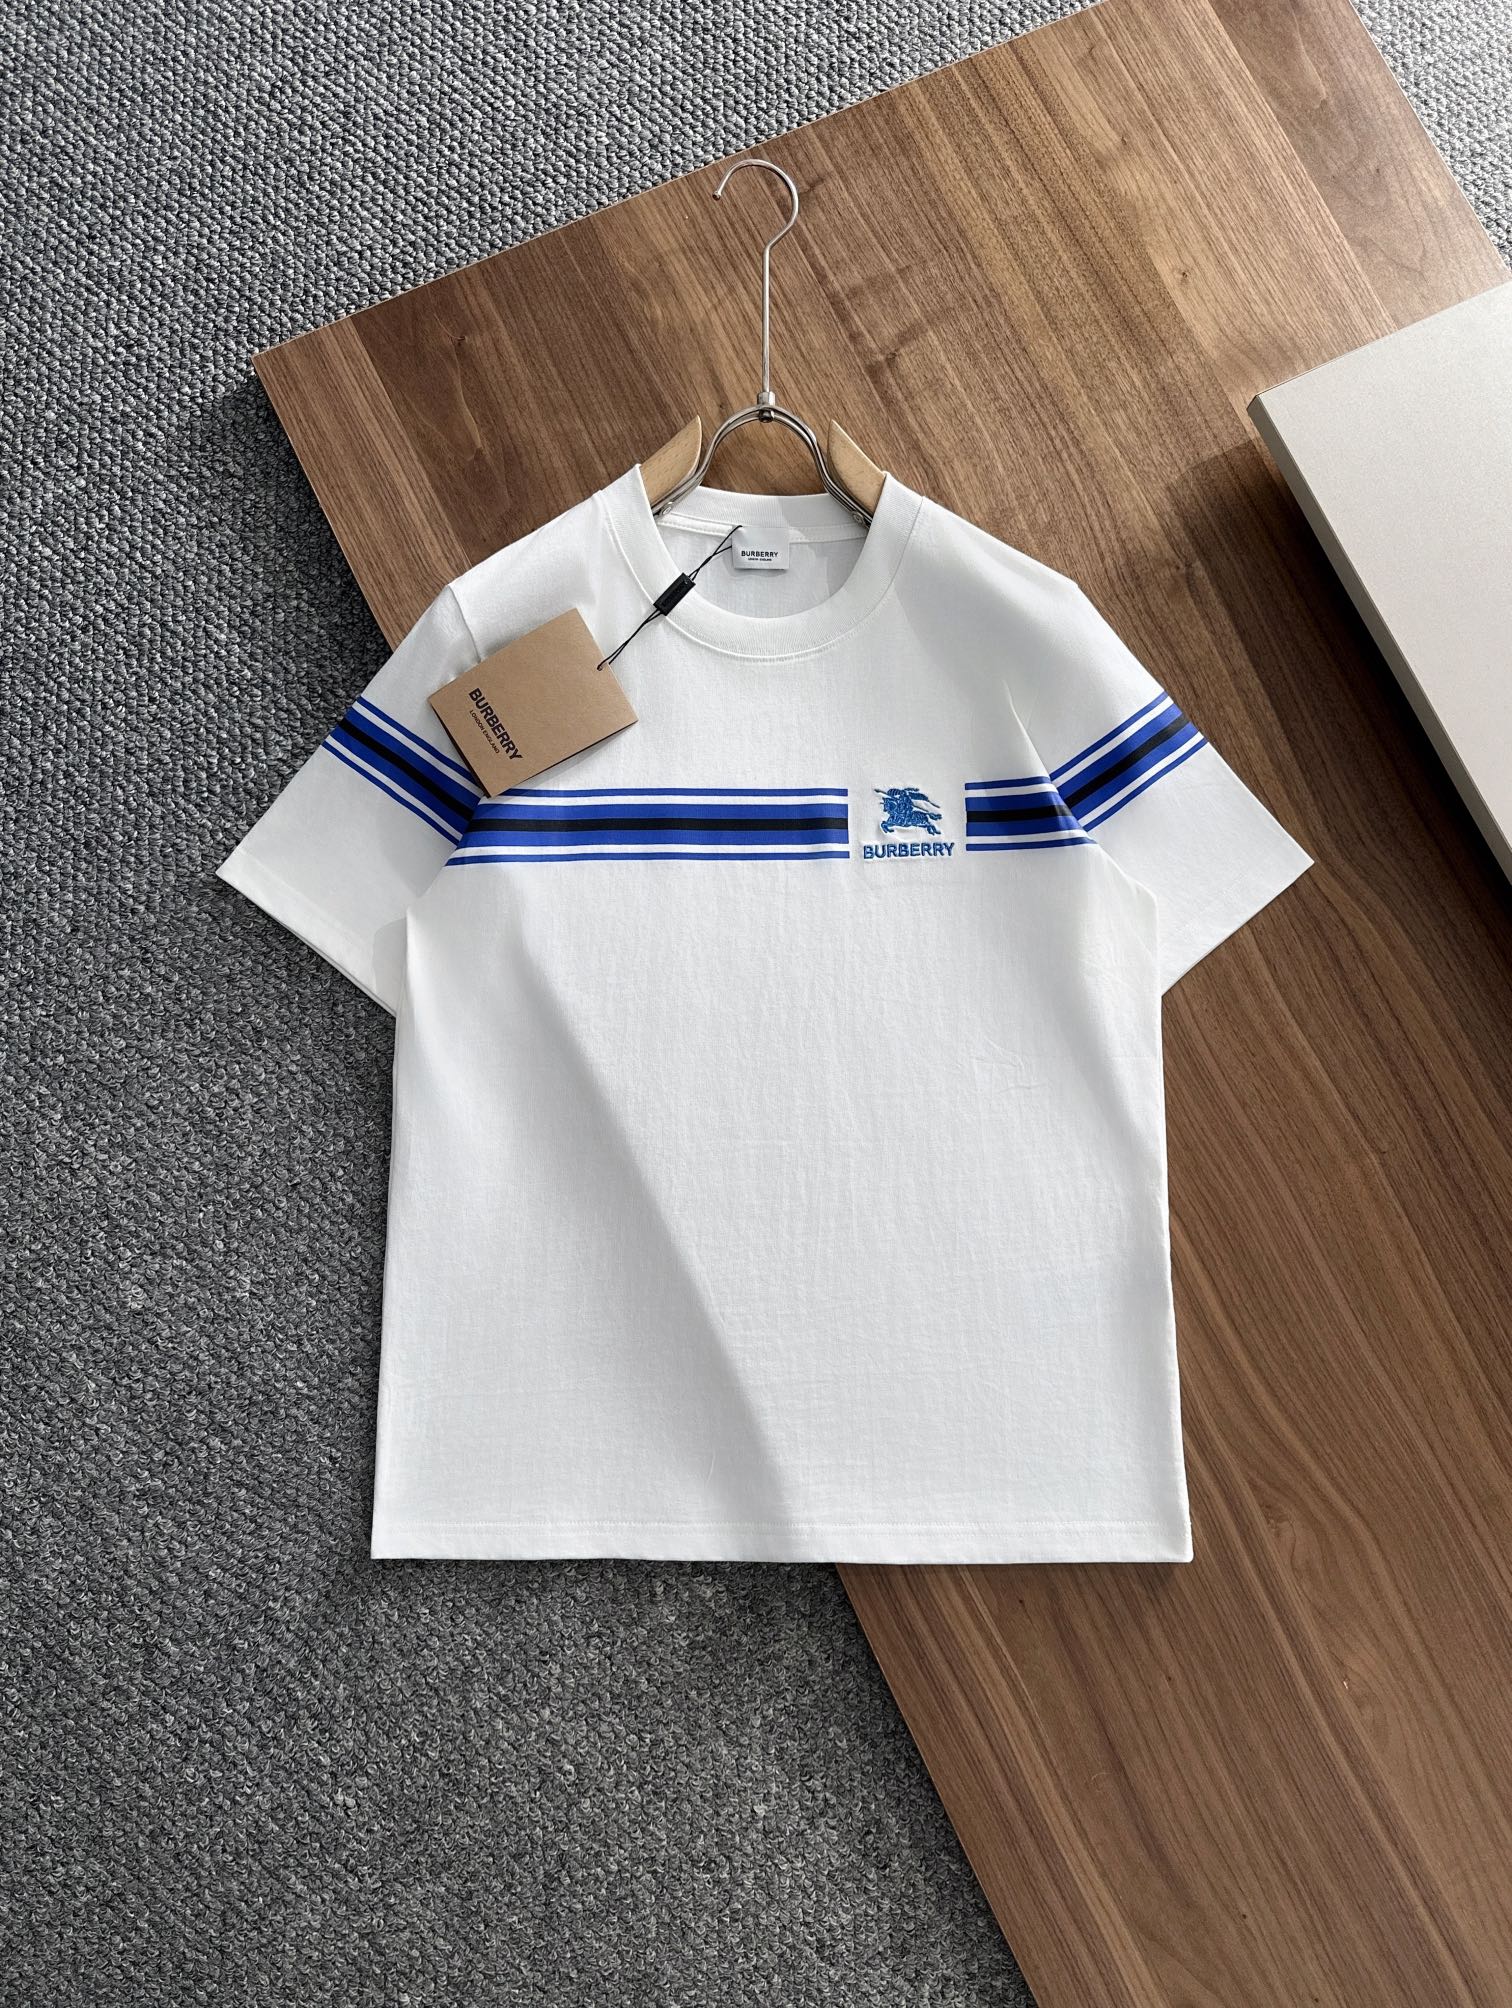 Burberry Clothing T-Shirt Summer Collection Fashion Short Sleeve